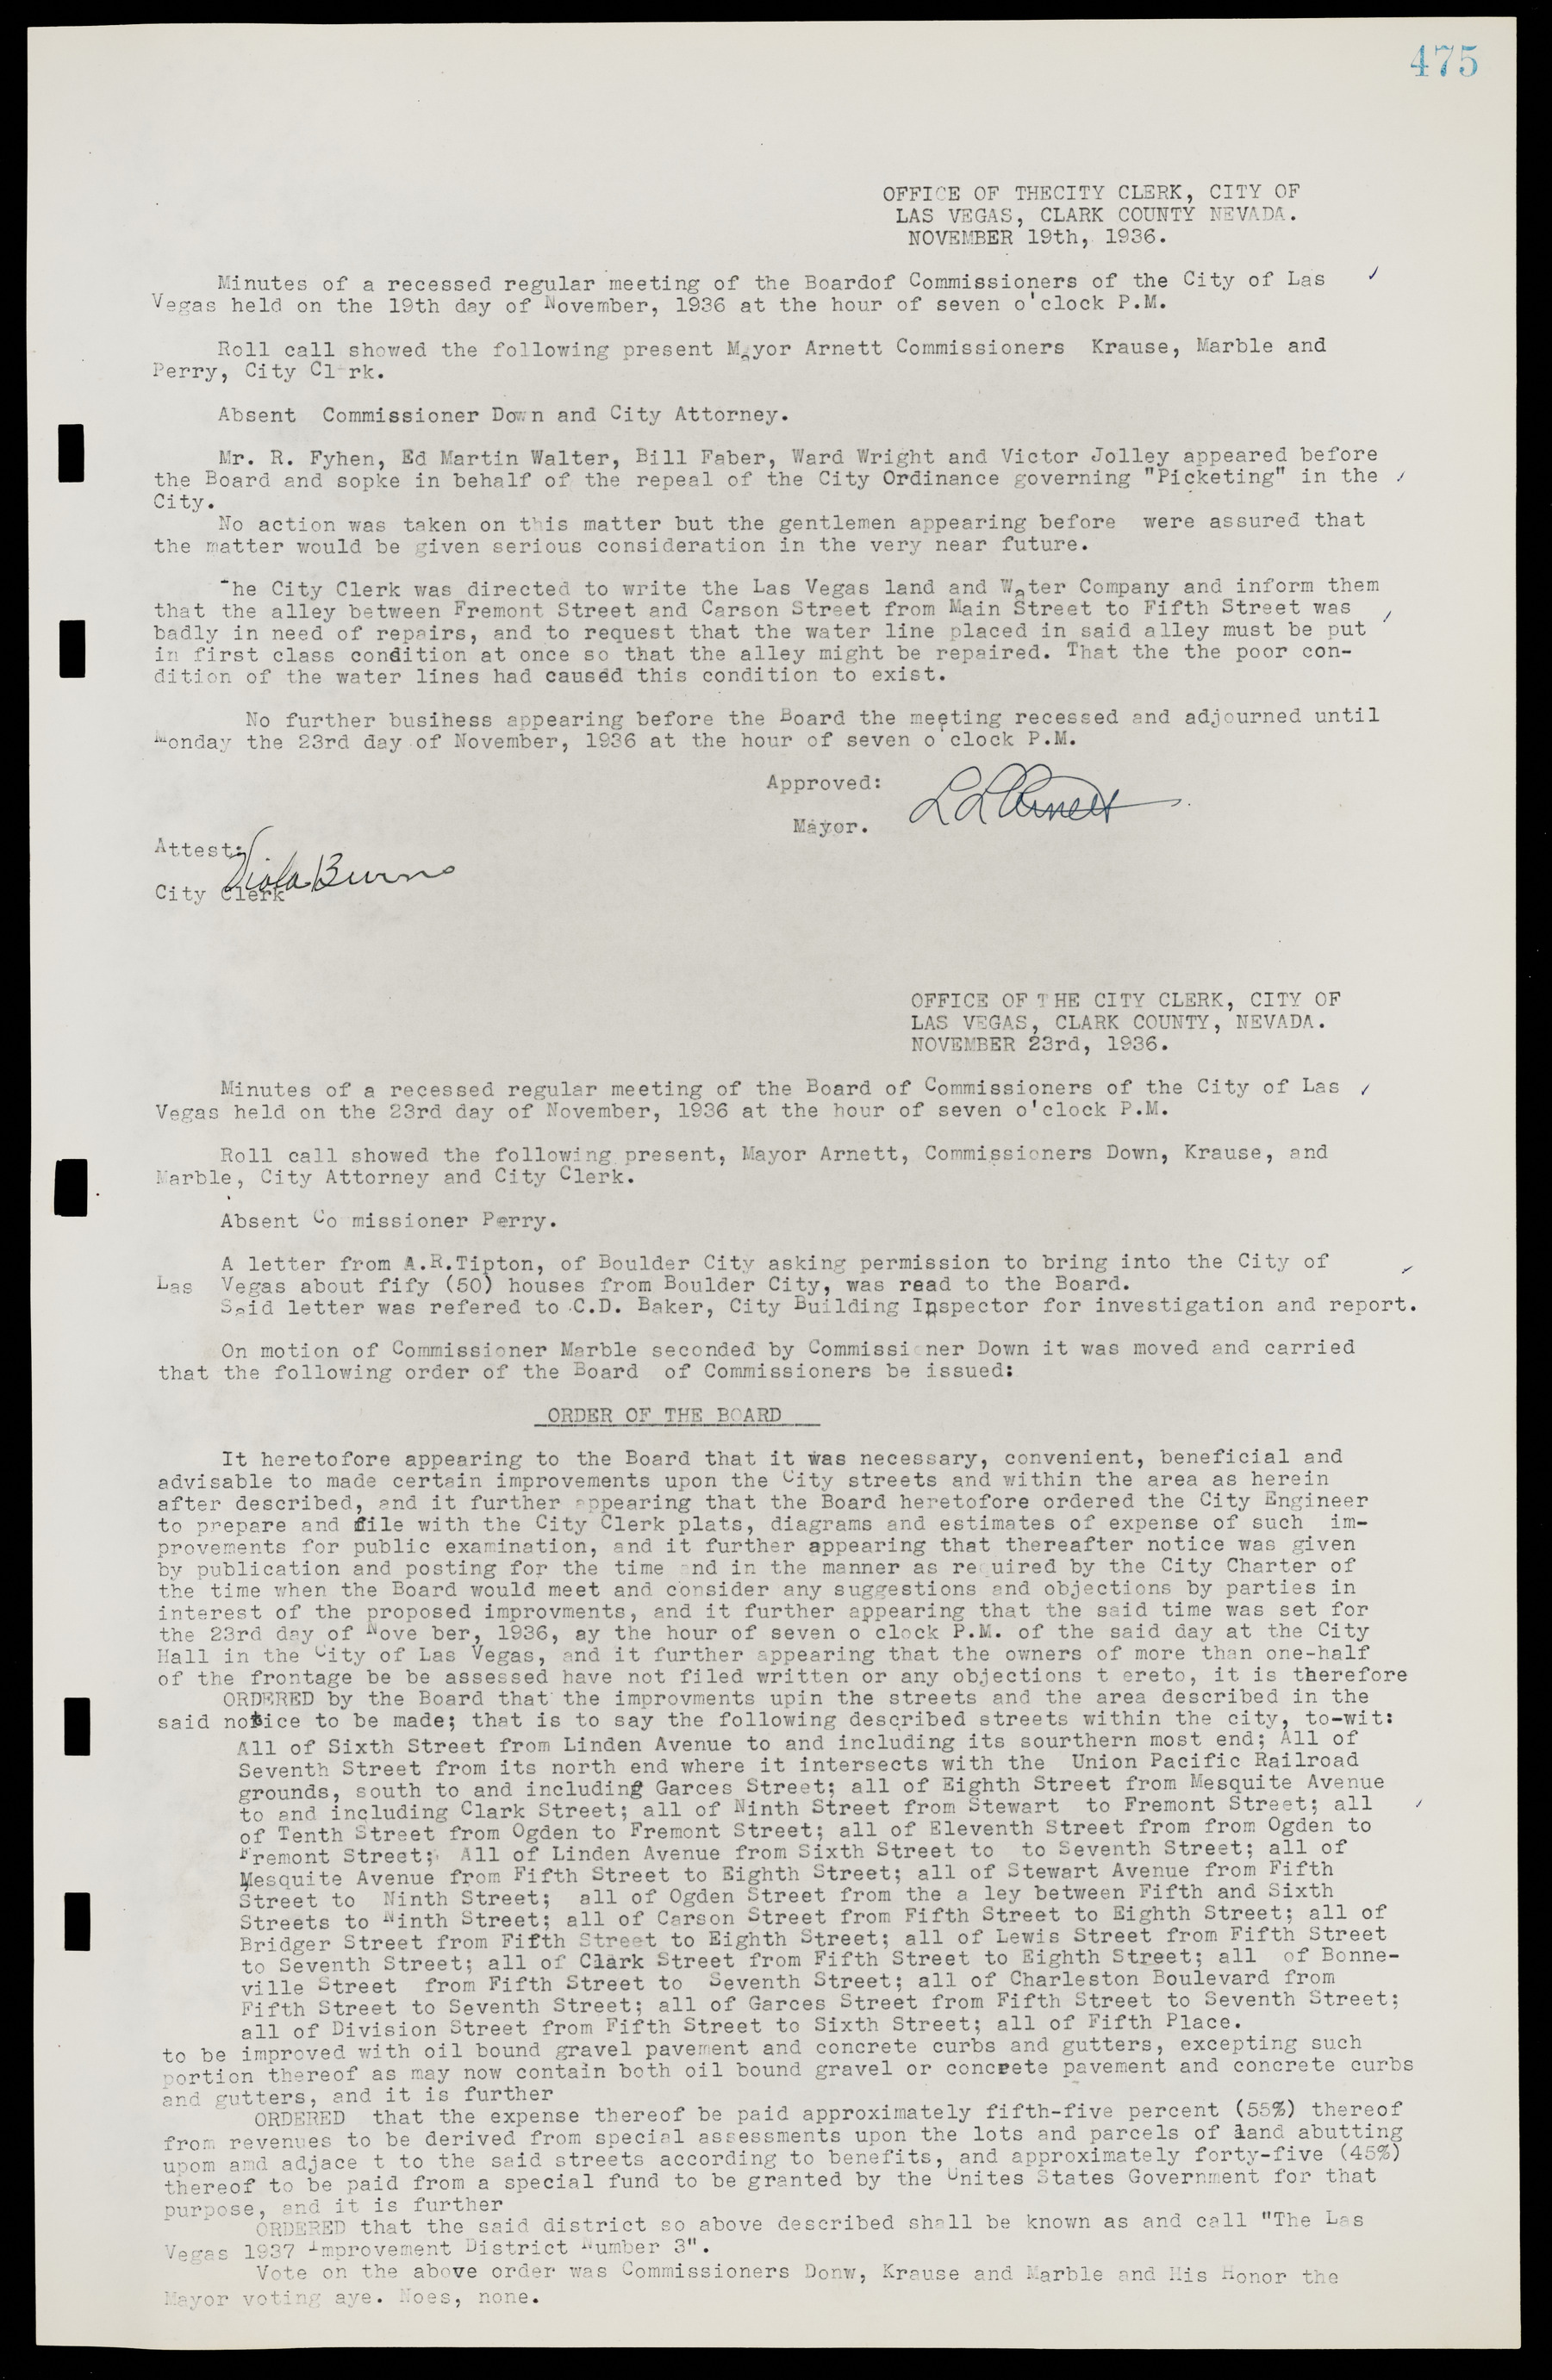 Las Vegas City Commission Minutes, May 14, 1929 to February 11, 1937, lvc000003-482